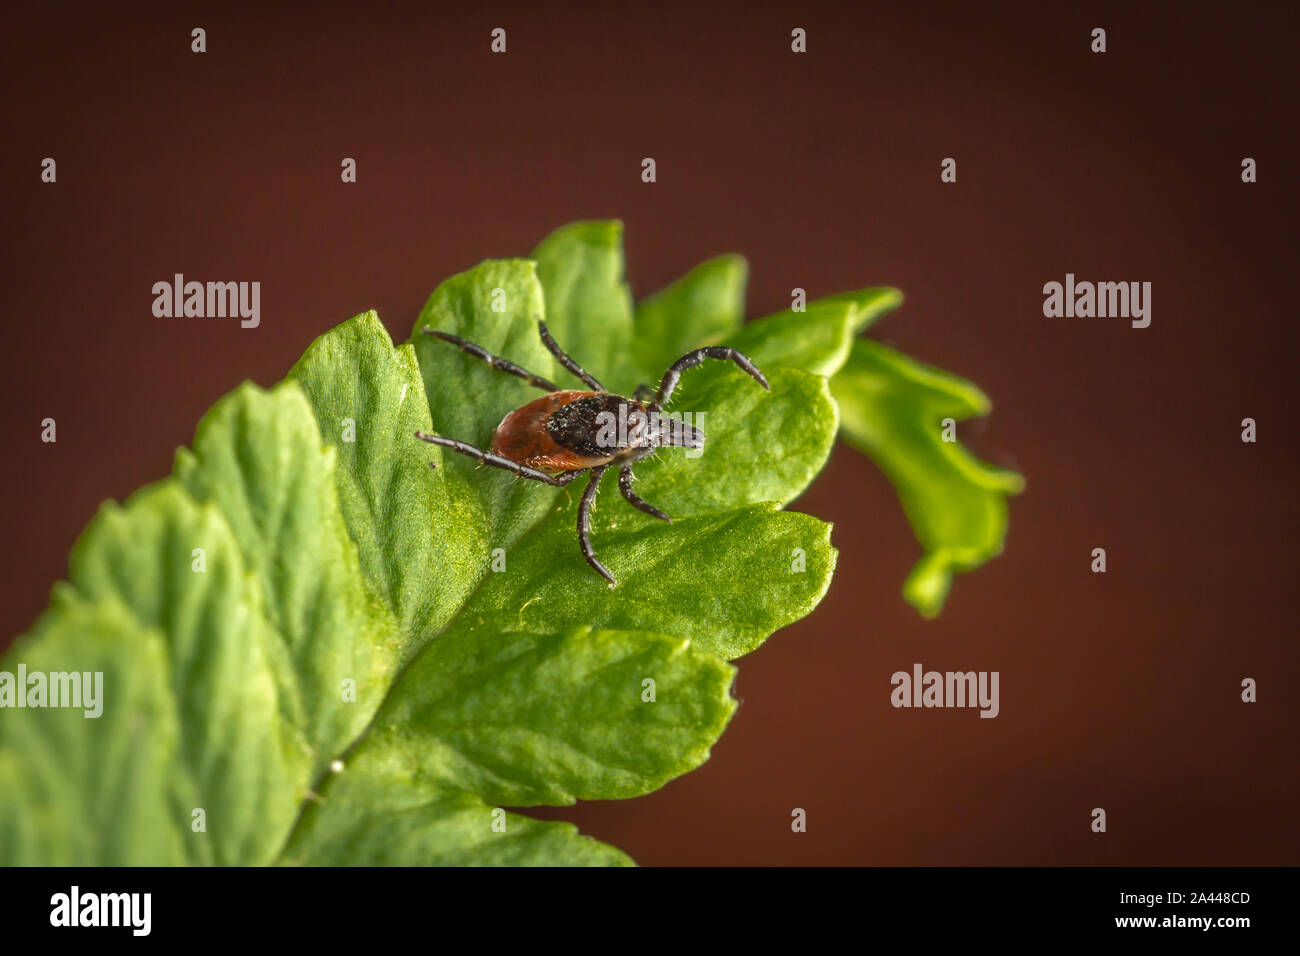 Female of the tick sitting on a leaf, brown background. A common European parasite attacking also humans. Stock Photo